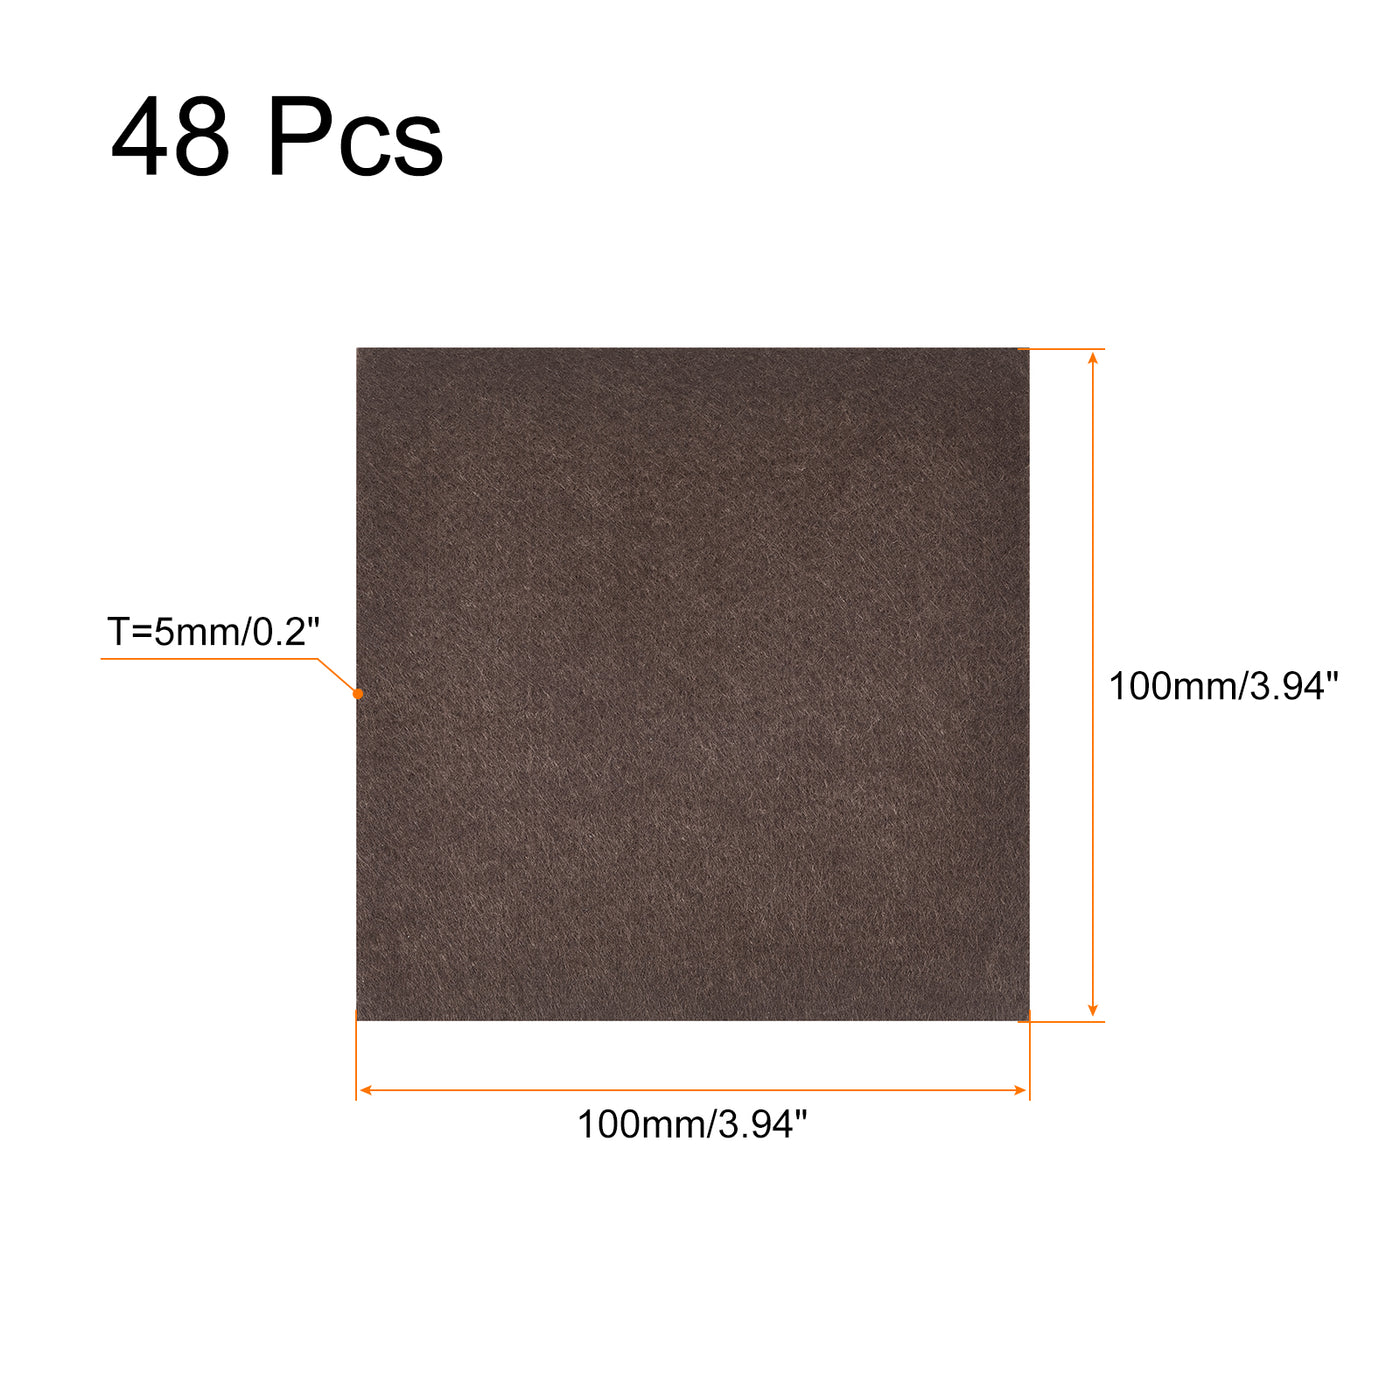 uxcell Uxcell Felt Furniture Pads, 100mm x 100mm Self Adhesive Square Floor Protectors for Furniture Legs Hardwood Floor, Brown 48Pcs